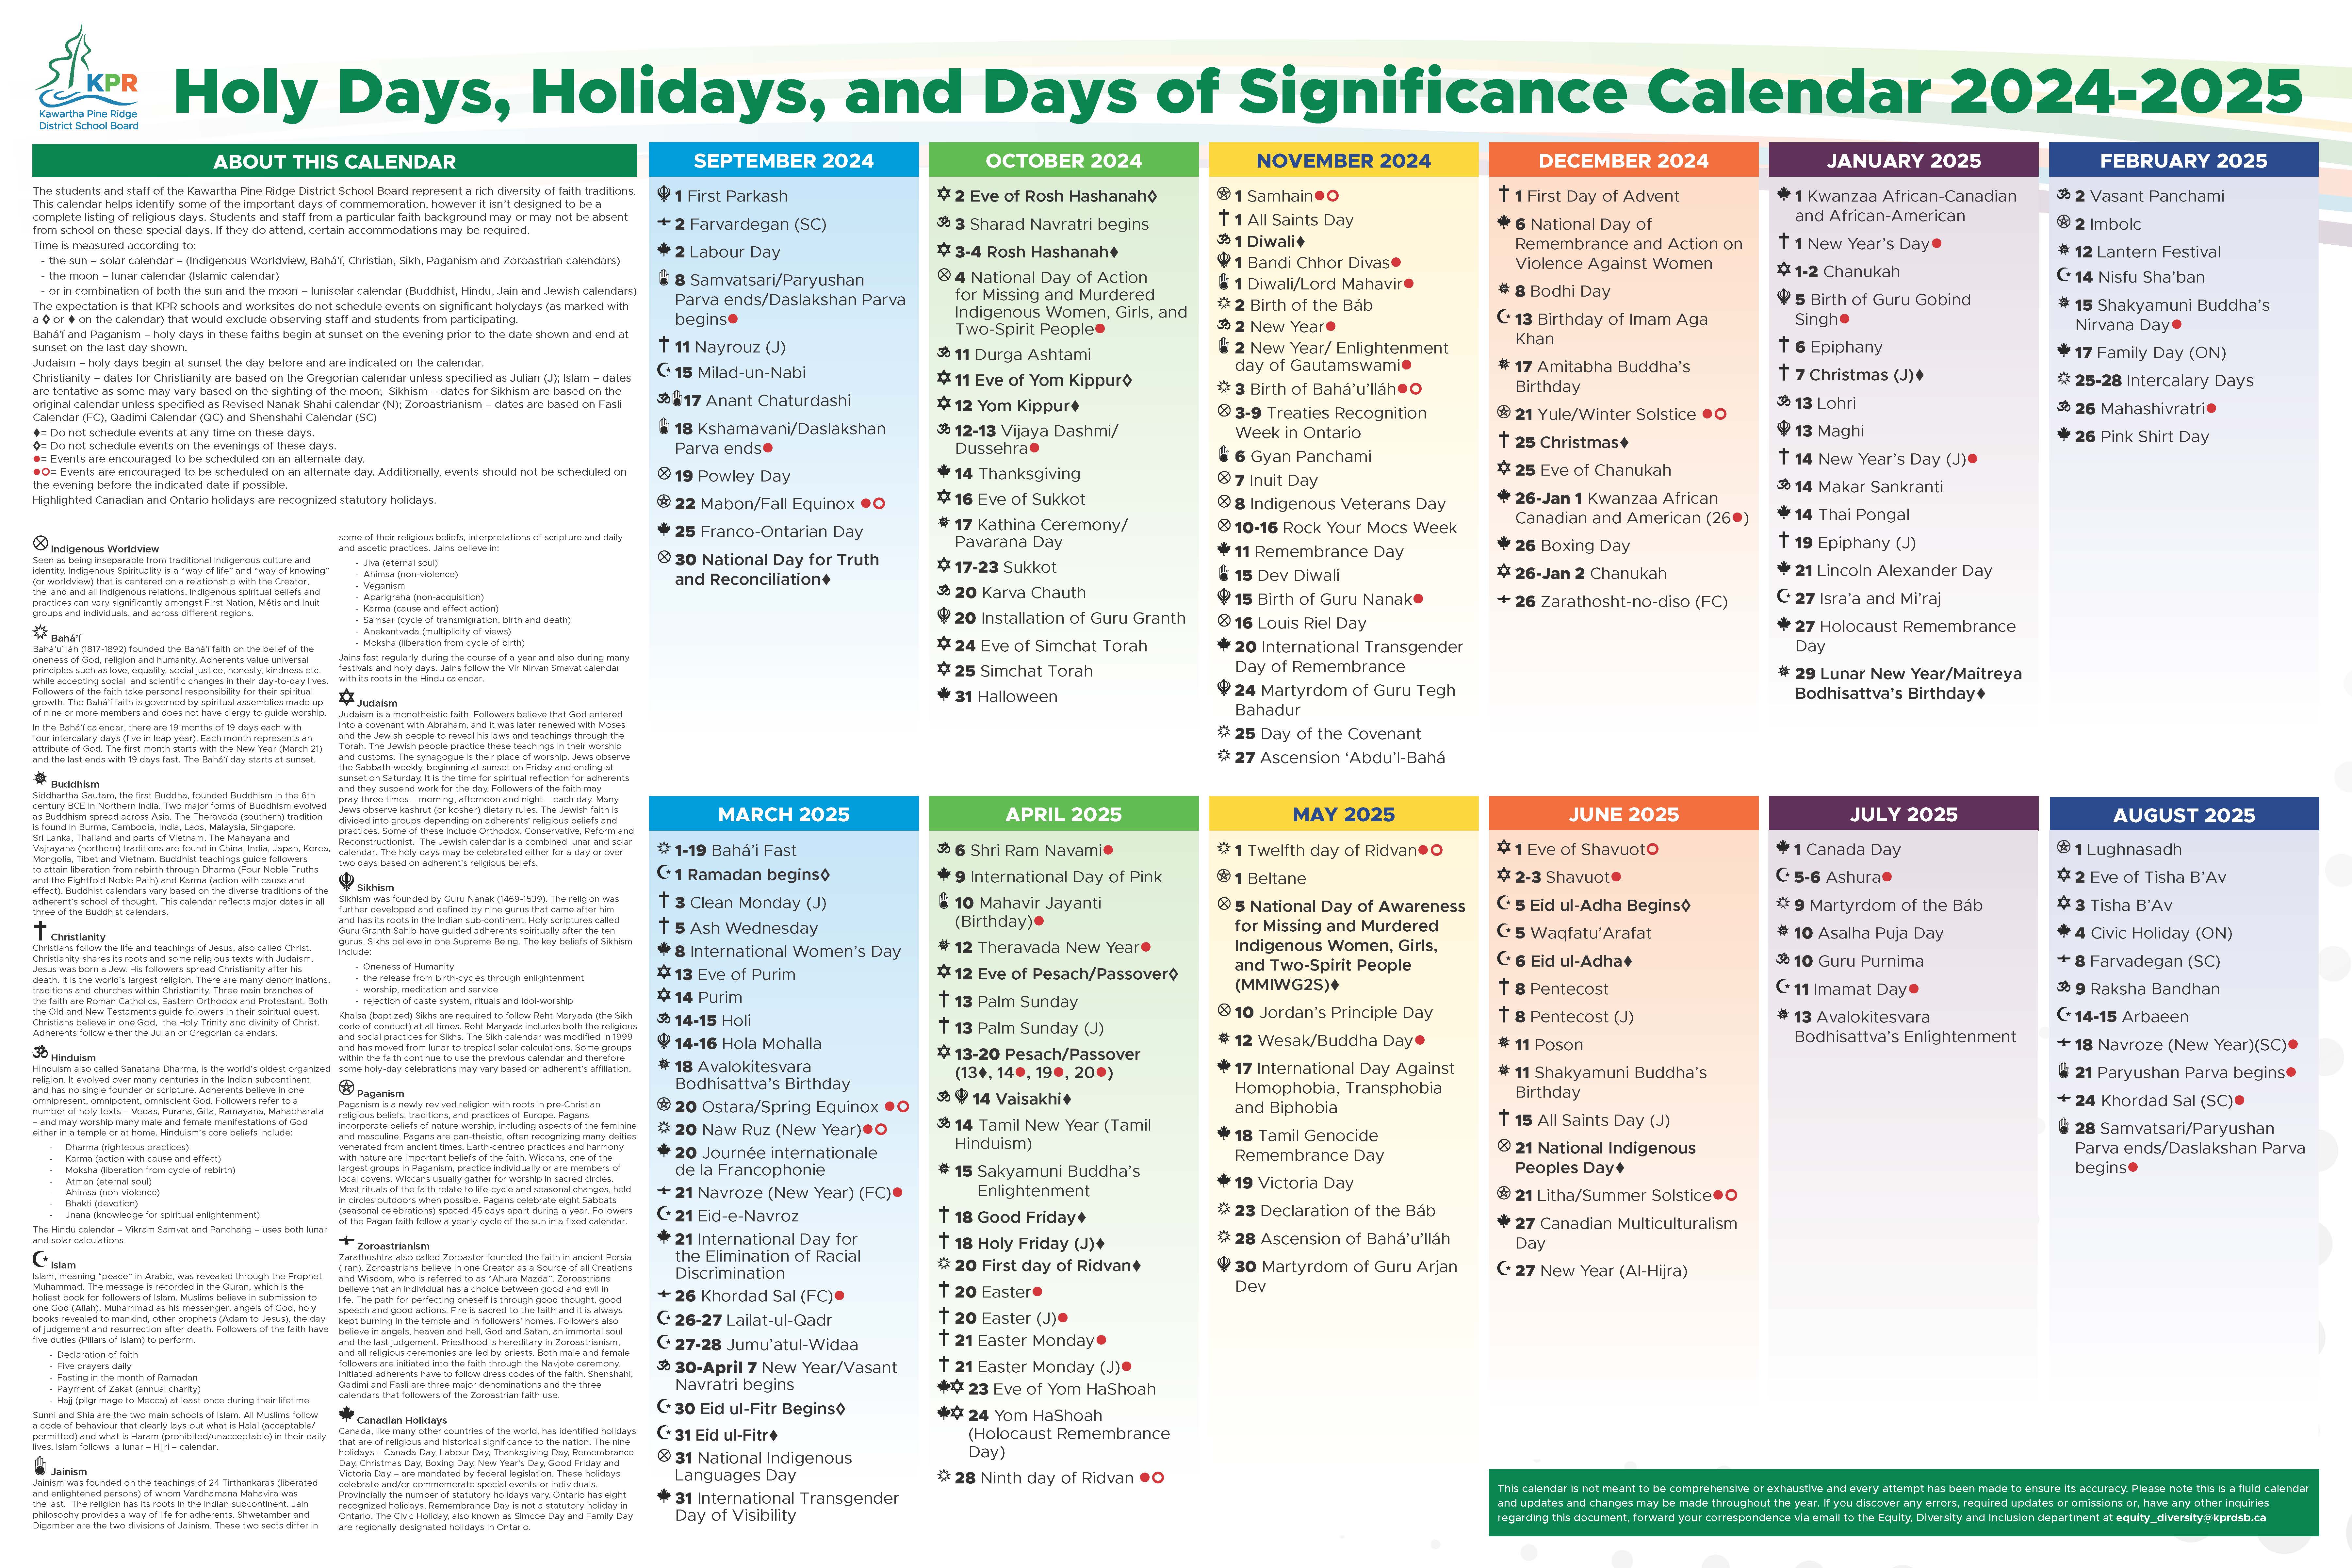 Holy Days, Holidays, and Days of Significance Calendar 